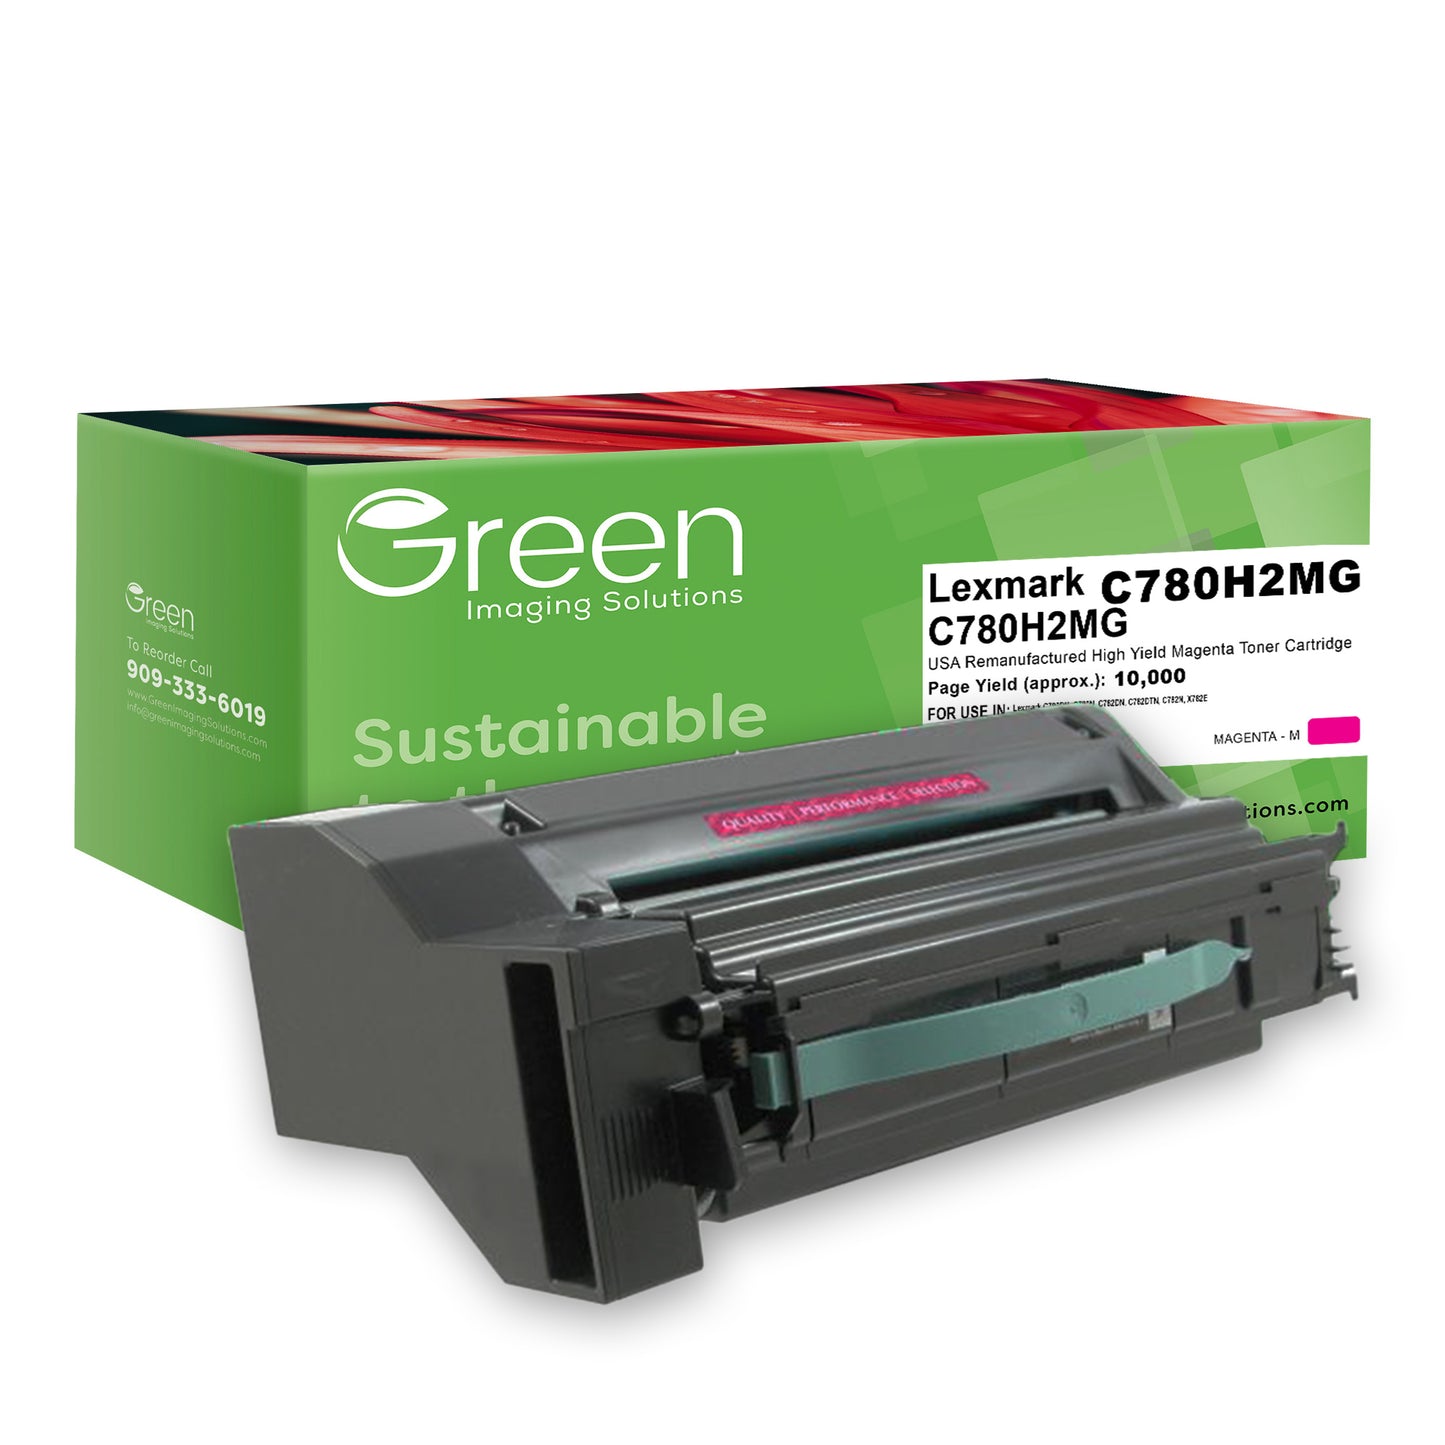 Green Imaging Solutions USA Remanufactured High Yield Magenta Toner Cartridge for Lexmark C780/C782/X782